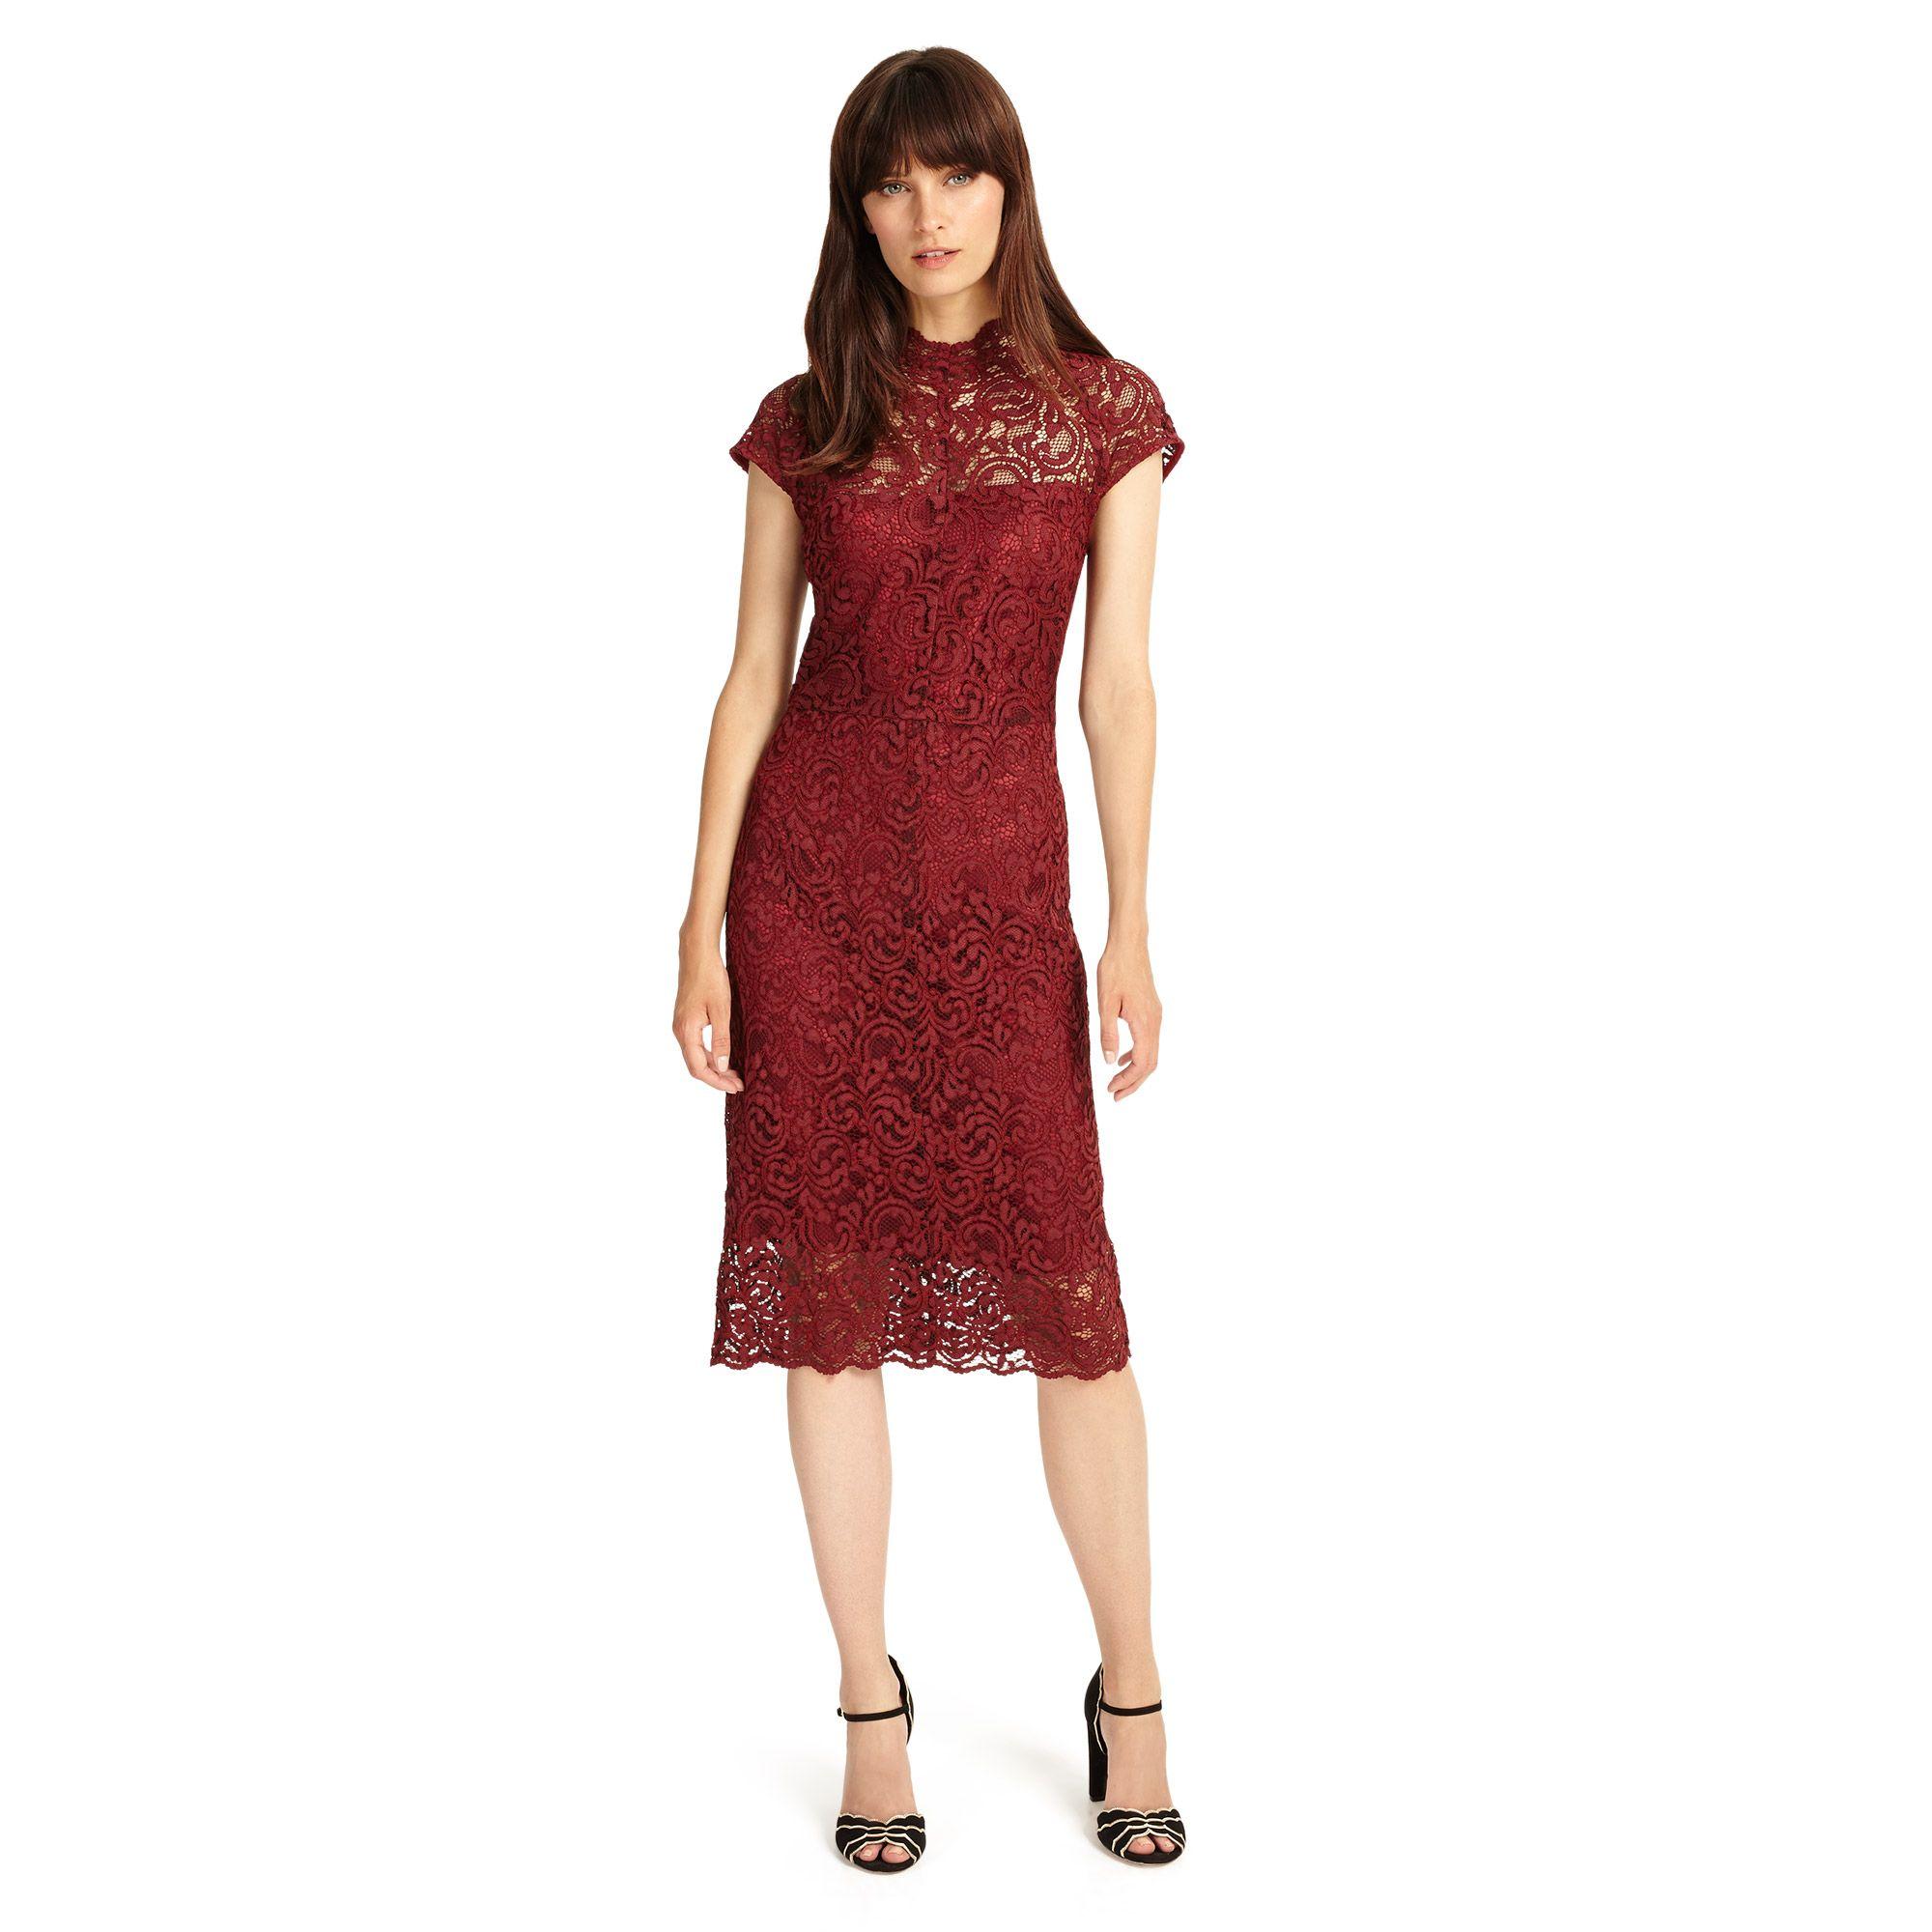 Phase Eight Becky Lace Dress in Dark Red (Red) - Lyst